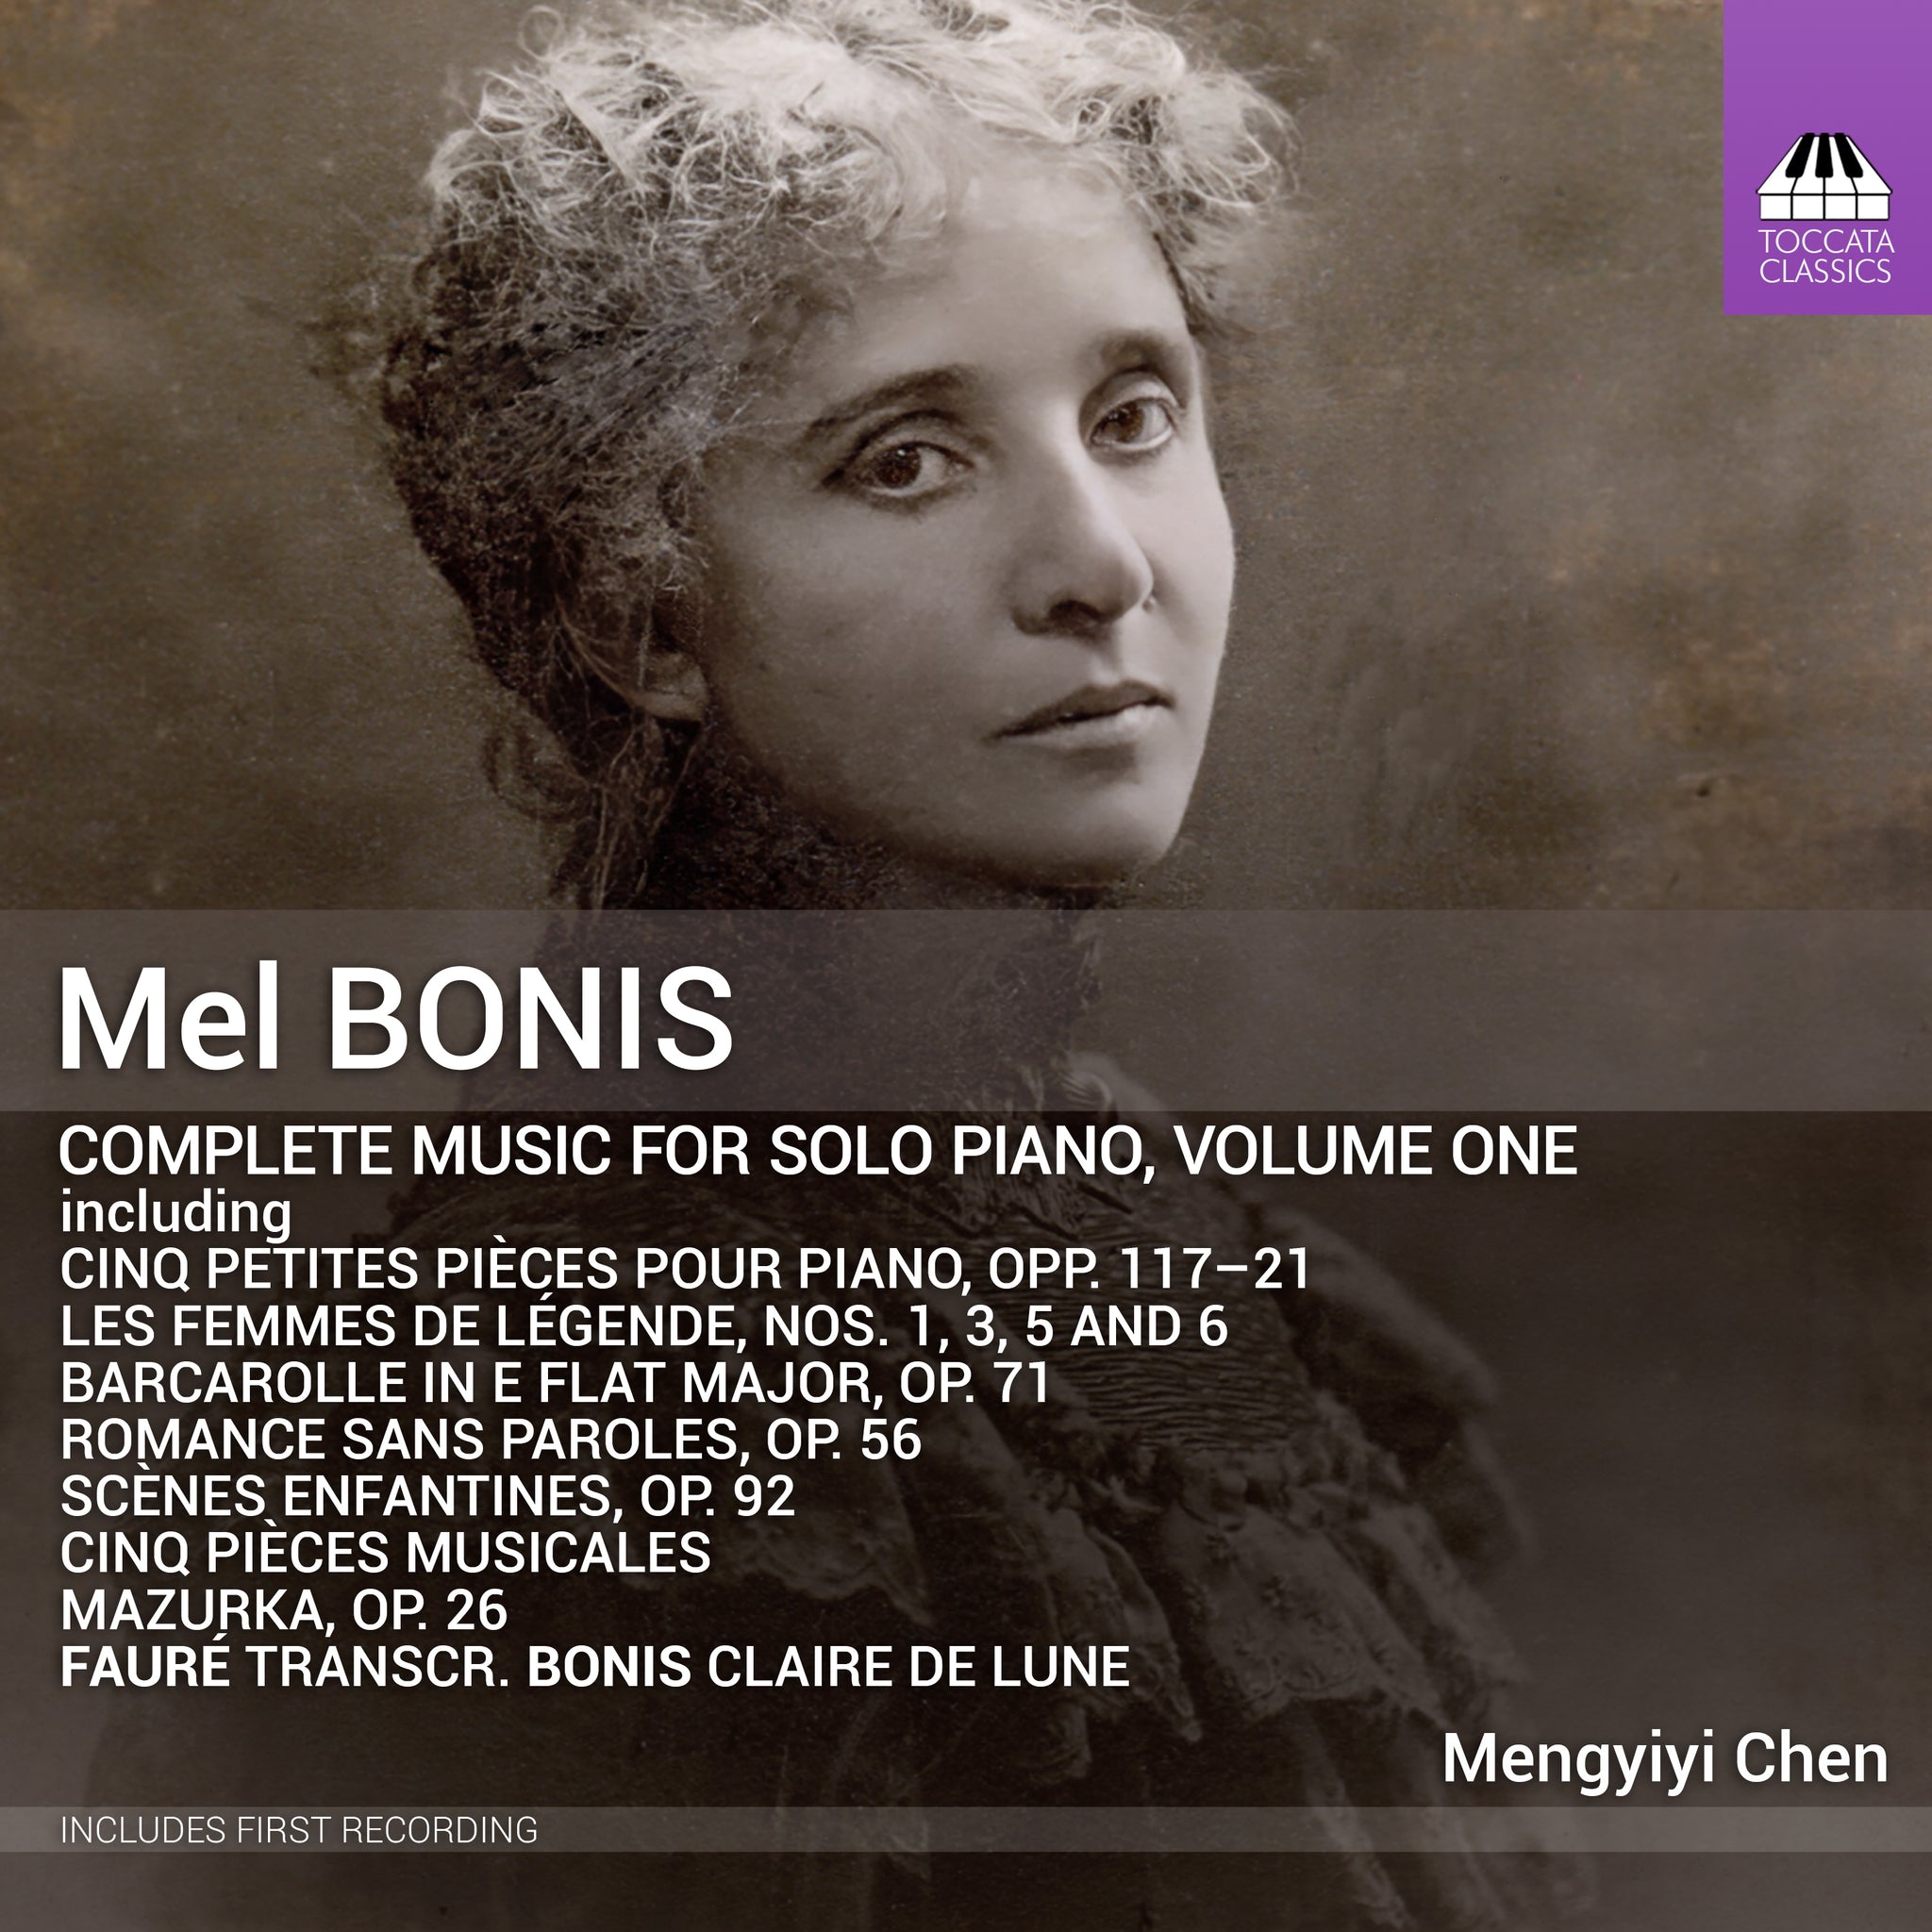 Bonis: Complete Music for Solo Piano, Vol. 1 / Mengyiyi Chen